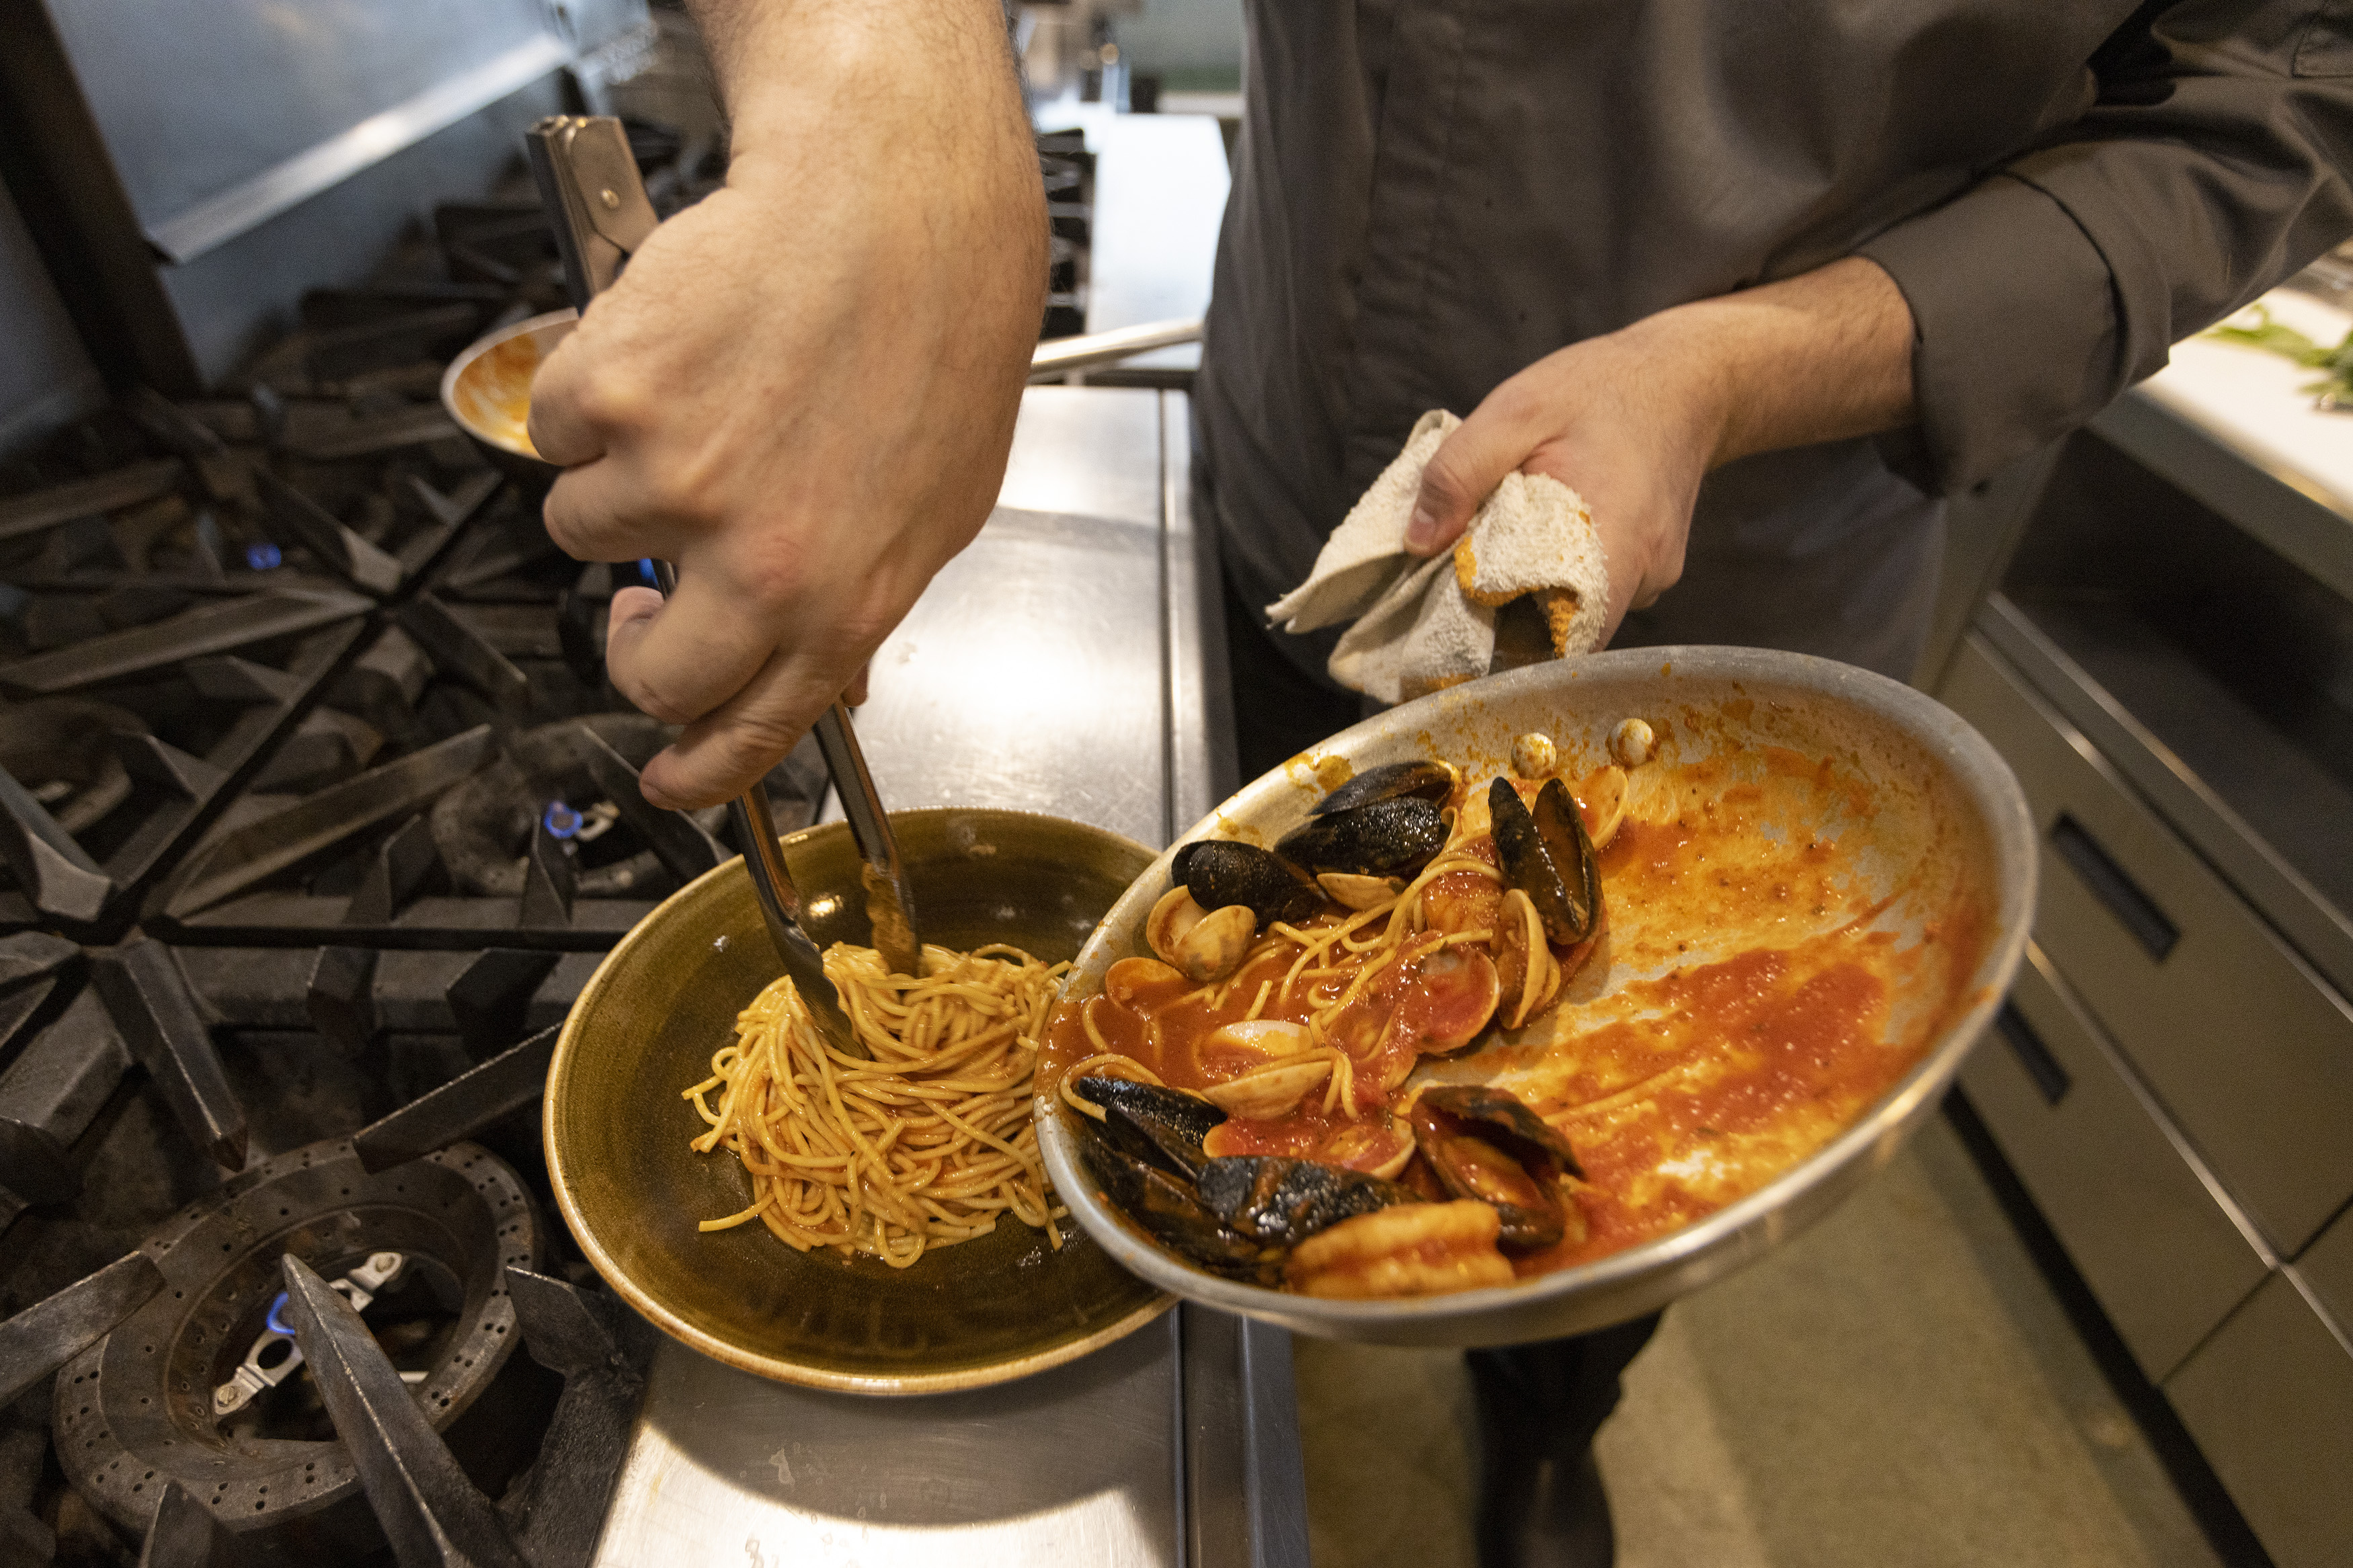 A chef uses tongs to plate a pasta dish in a restaurant kitchen.